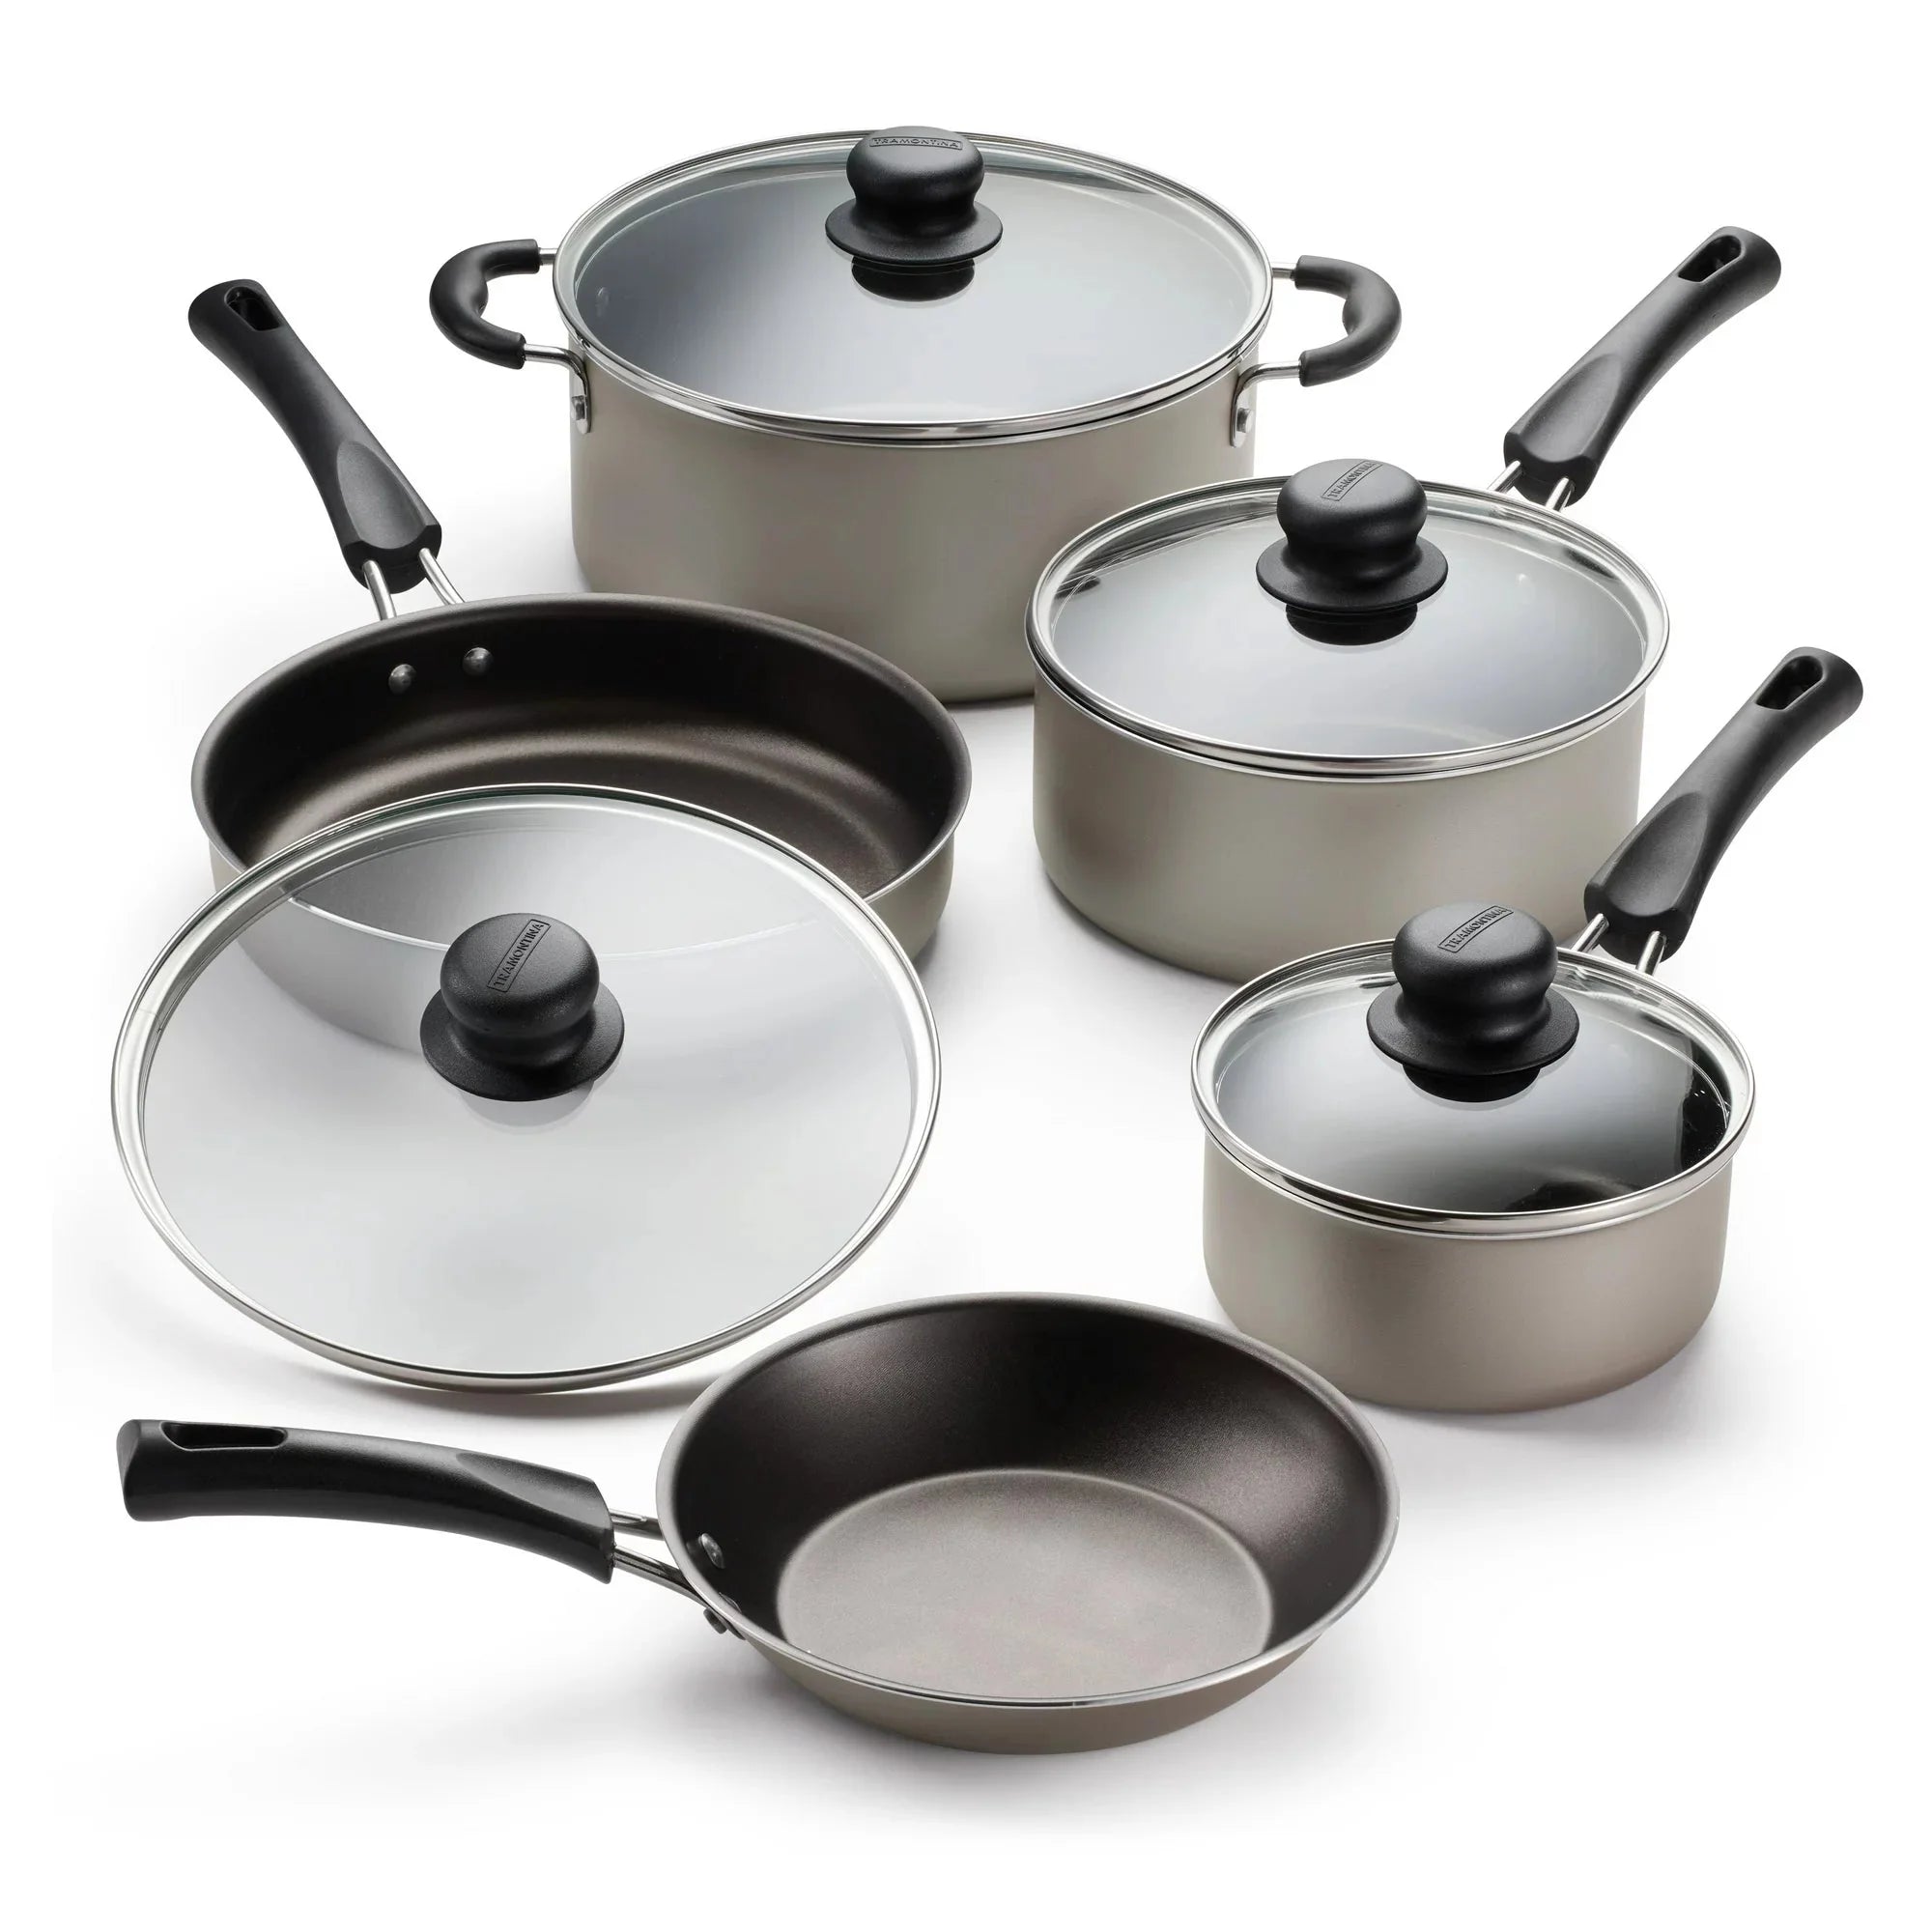 Wholesale prices with free shipping all over United States Tramontina 9-Piece Non-Stick Cookware Set, Champagne - Steven Deals